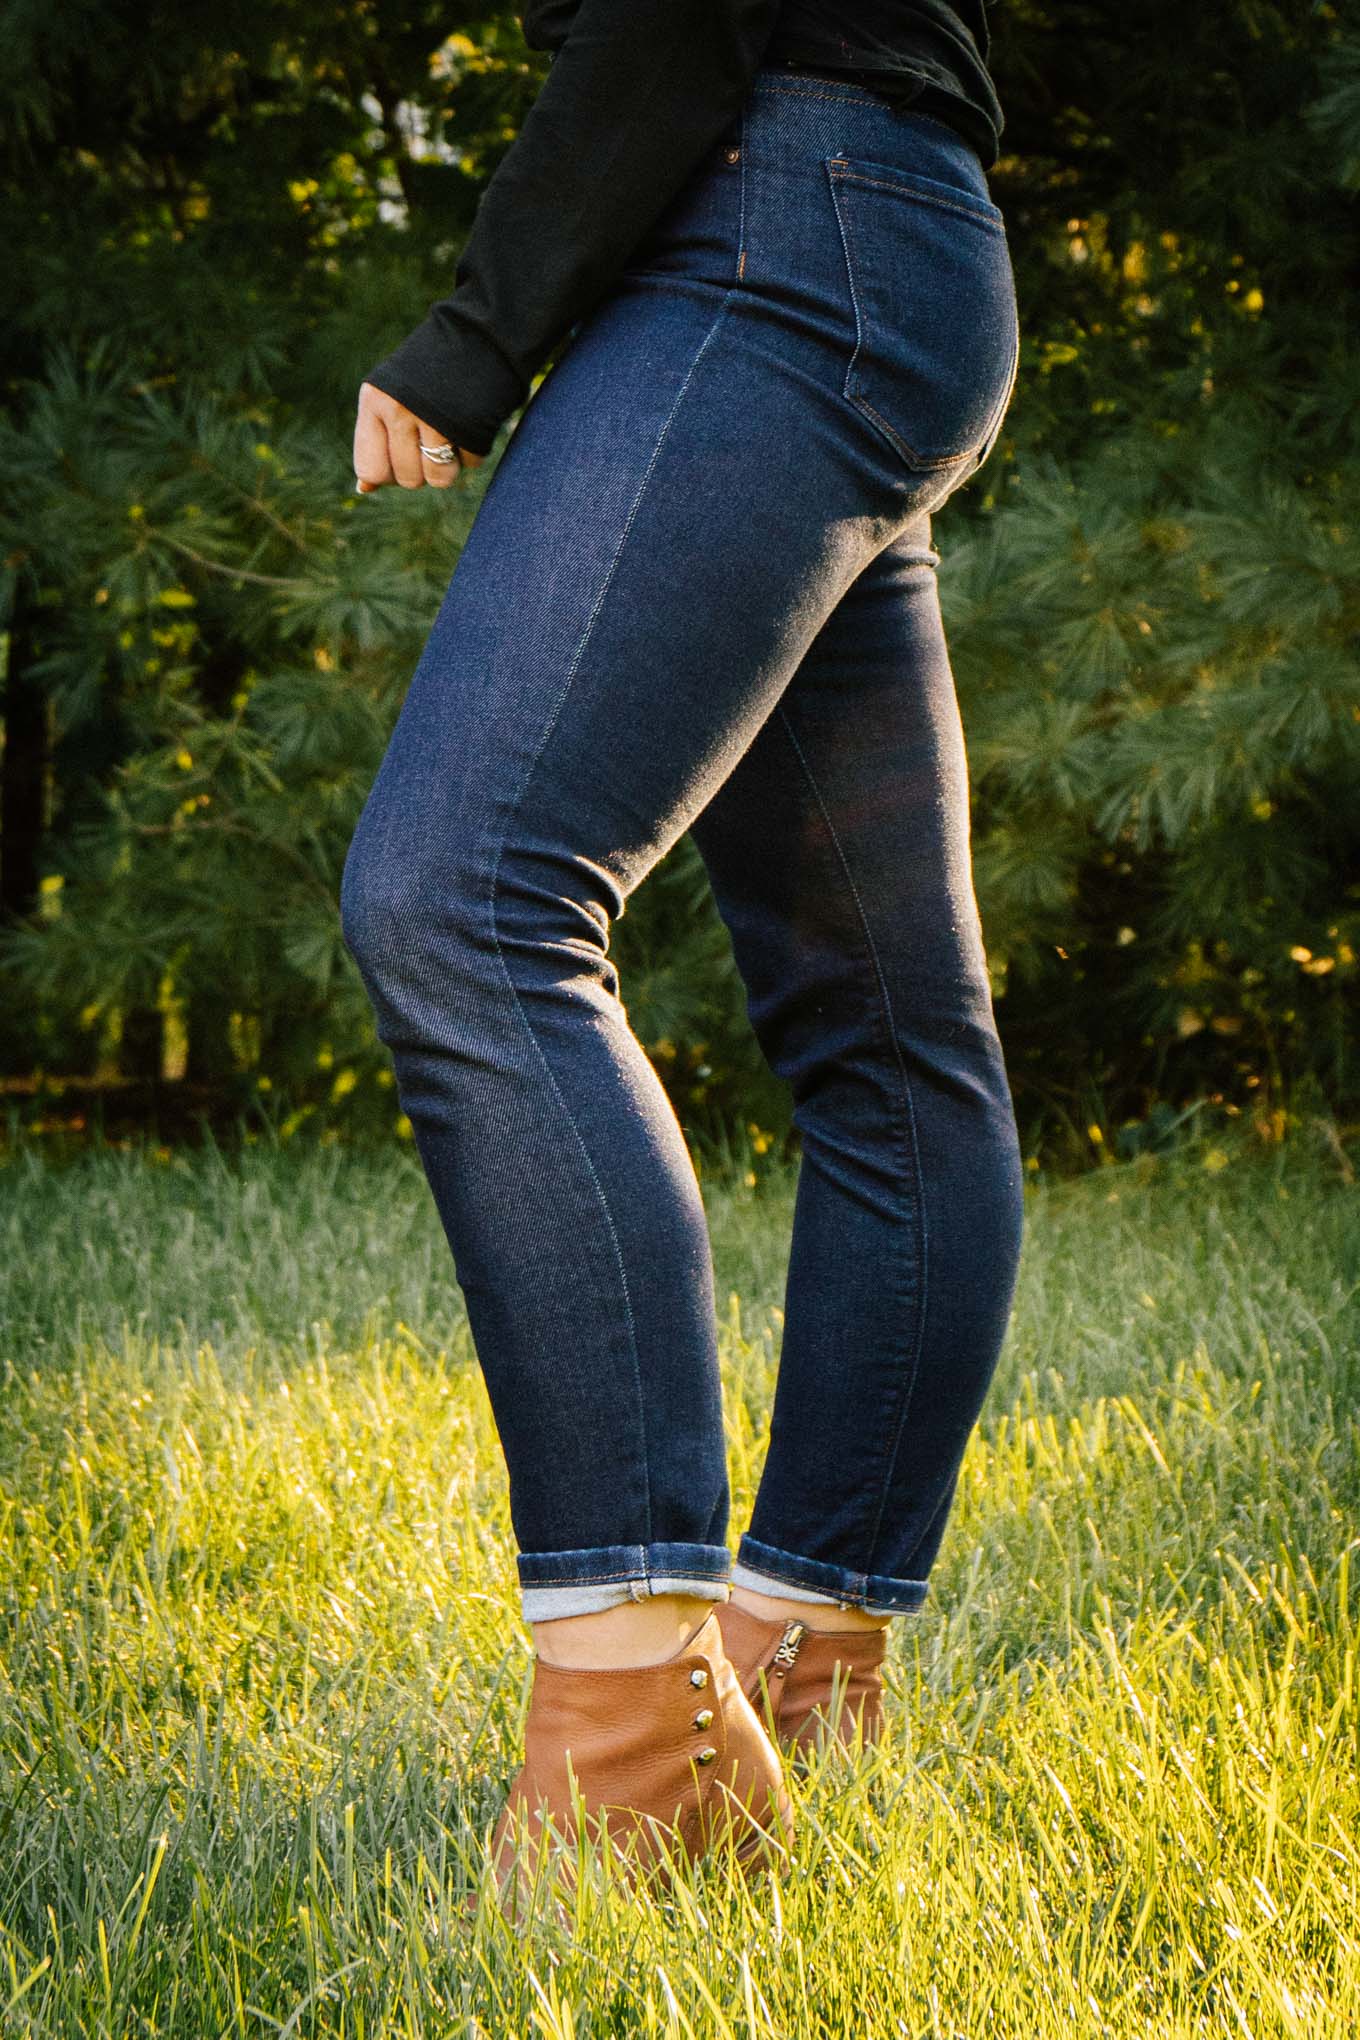 Mott and Bow Jeans Review: Is the popular denim worth buying? - Reviewed